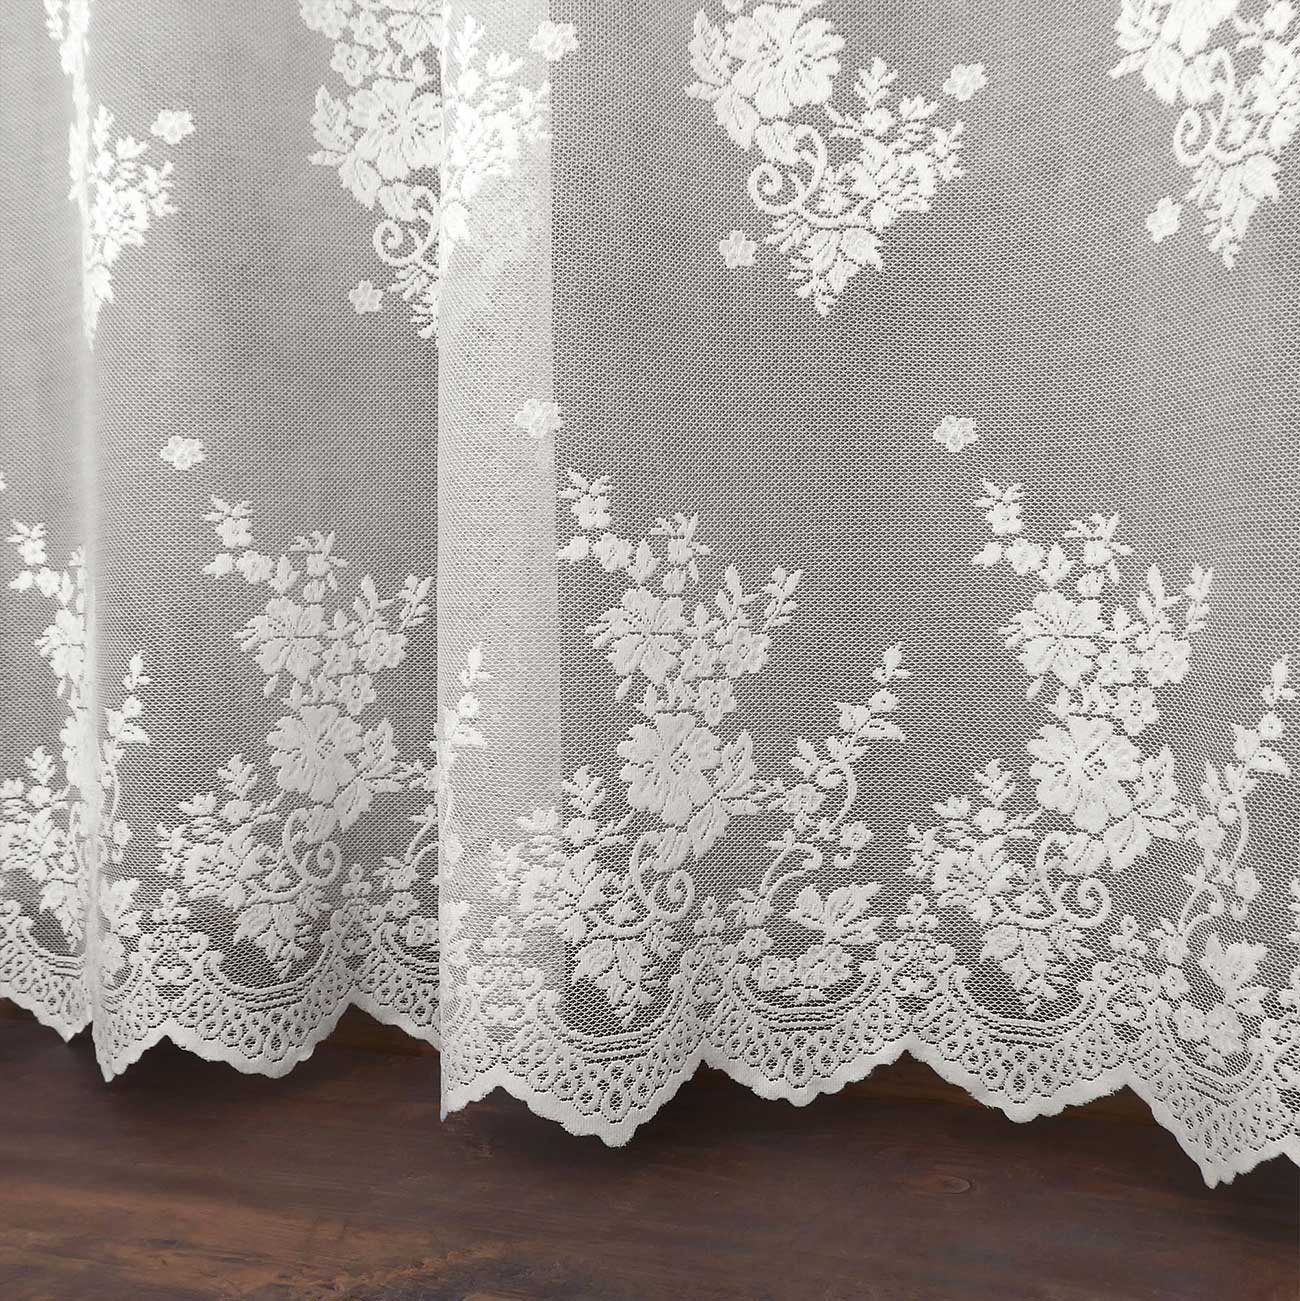 Tenda Pizzo di Poliestere Stile Shabby Chic 300 x 290 Poly-Sunset Collection Colore Bianco